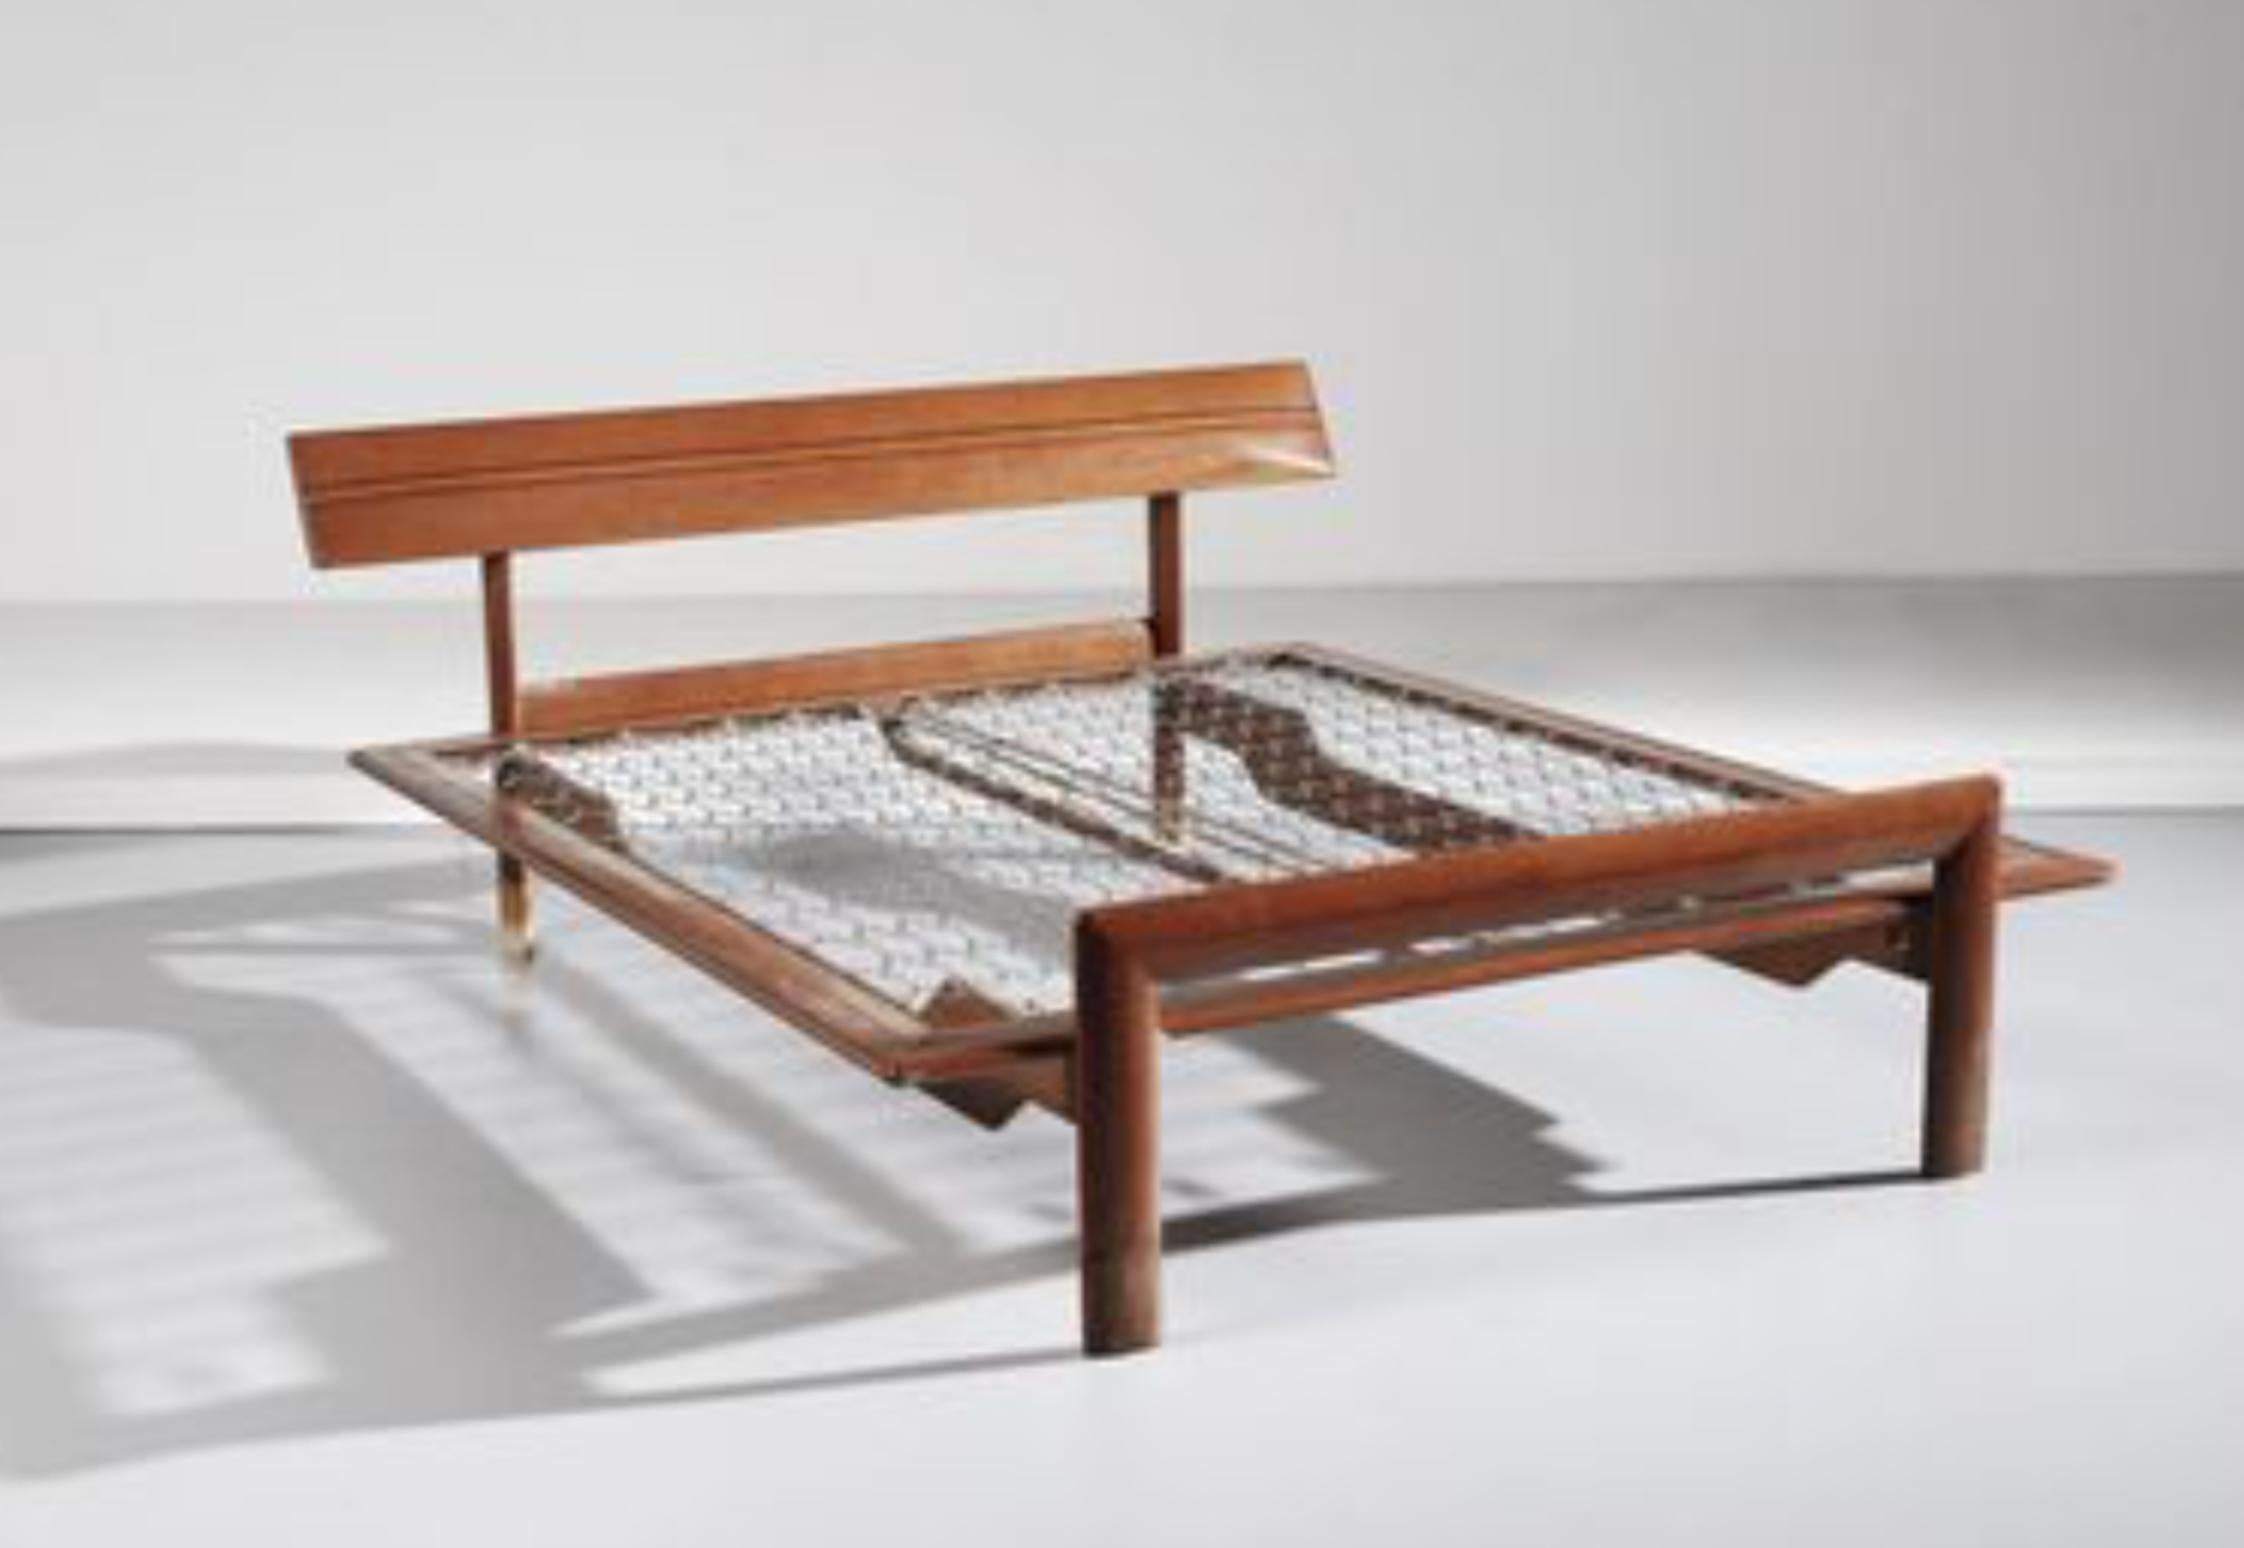 20th Century Mid-Century Modern Wooden Italian Bed Frame Made by Eugenio Gerli for Tecno For Sale